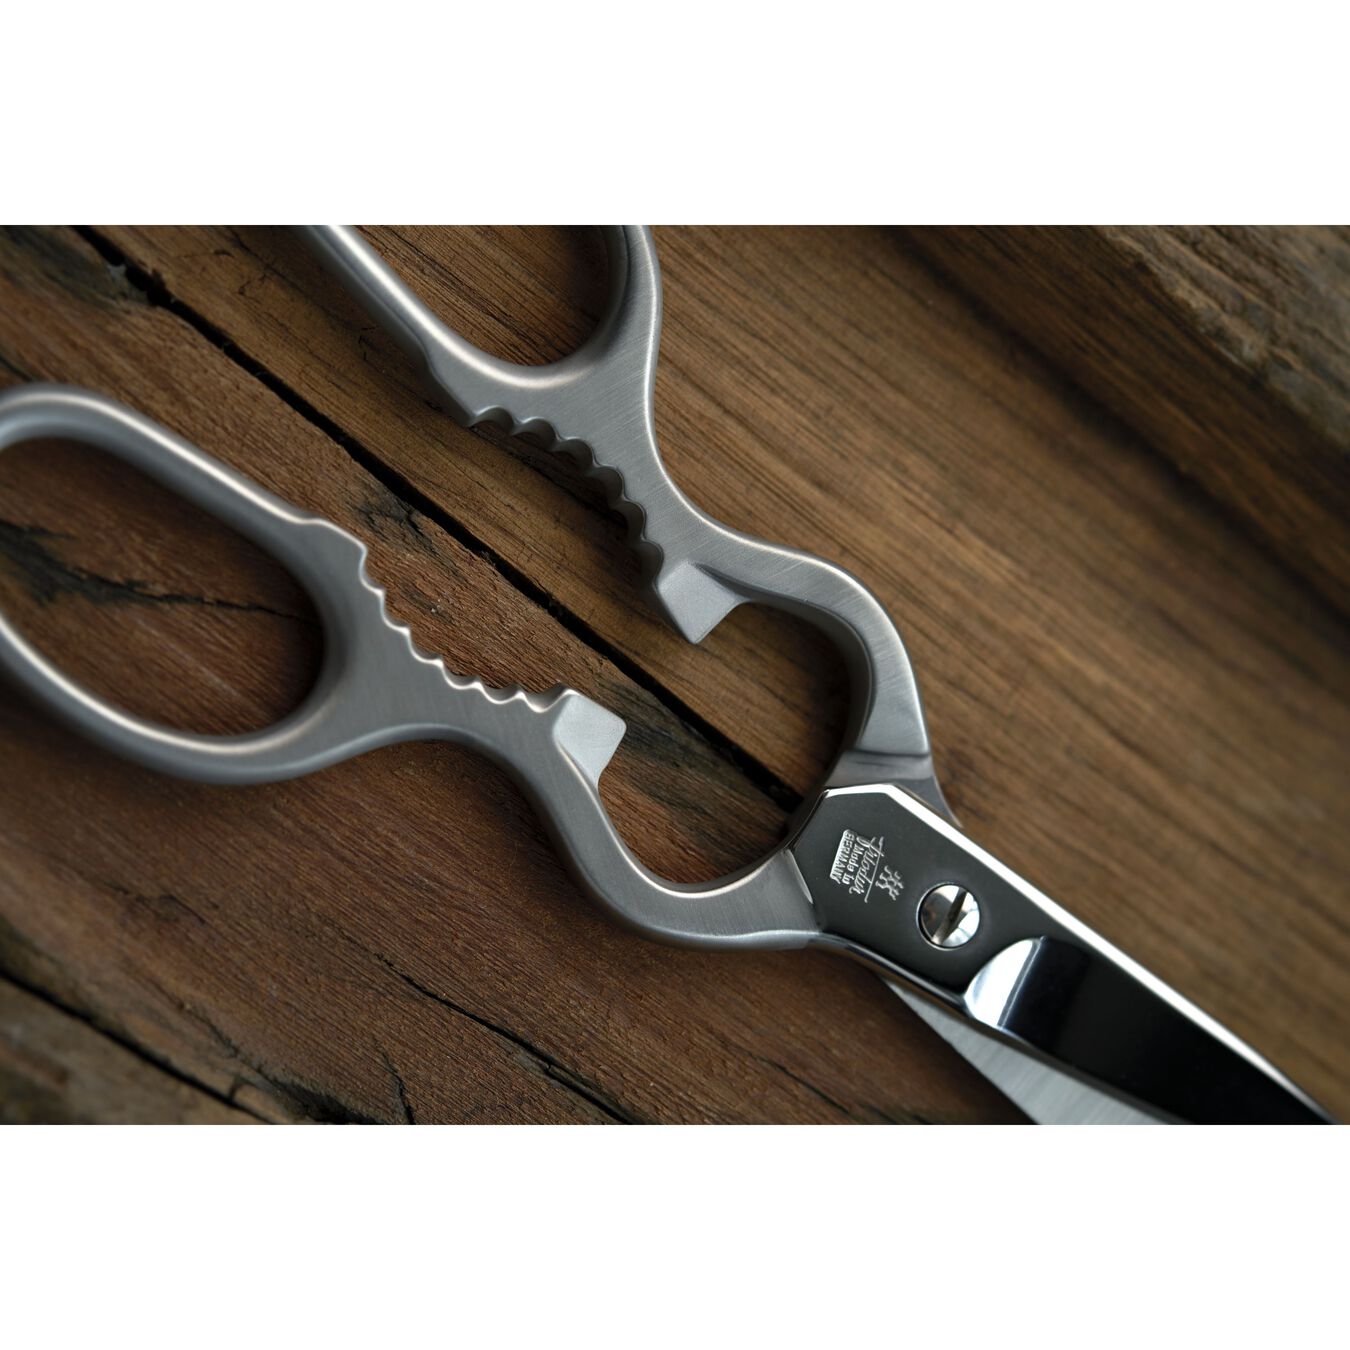 Stainless steel Multi-purpose shears silver,,large 3